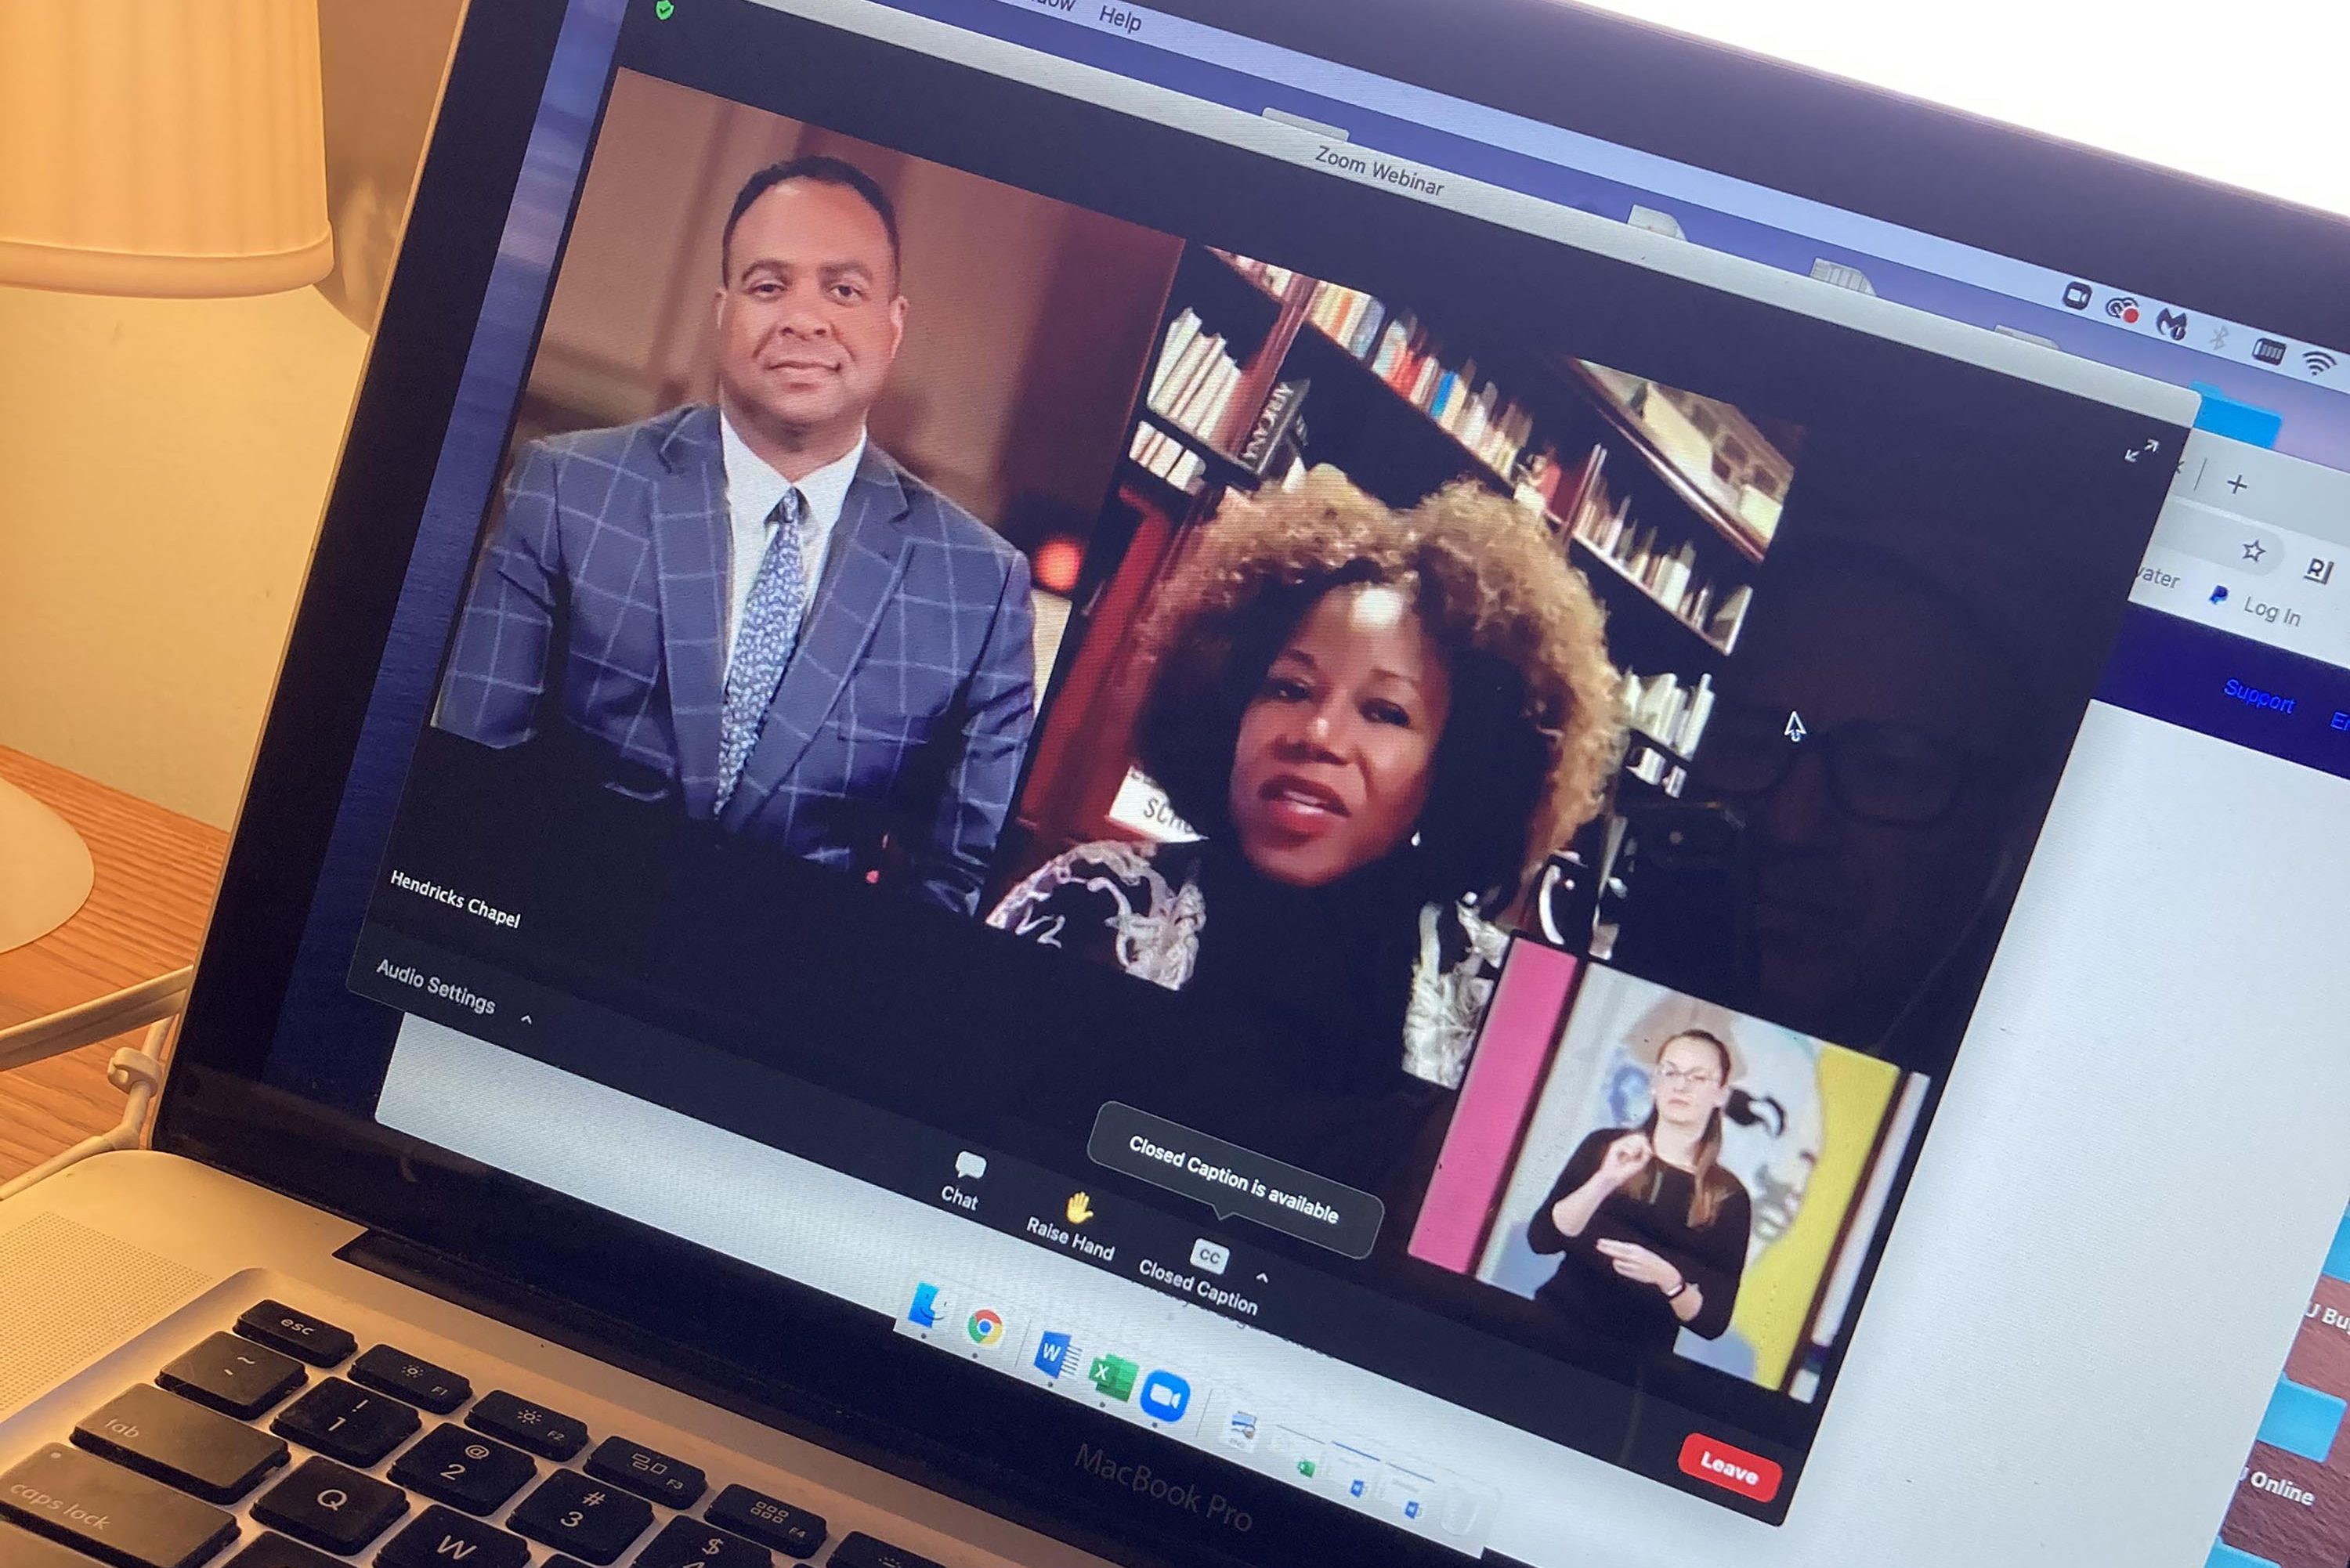 SU's 36th annual Martin Luther King Jr. virtual celebration on Sunday featured civil rights activist Ruby Bridges.